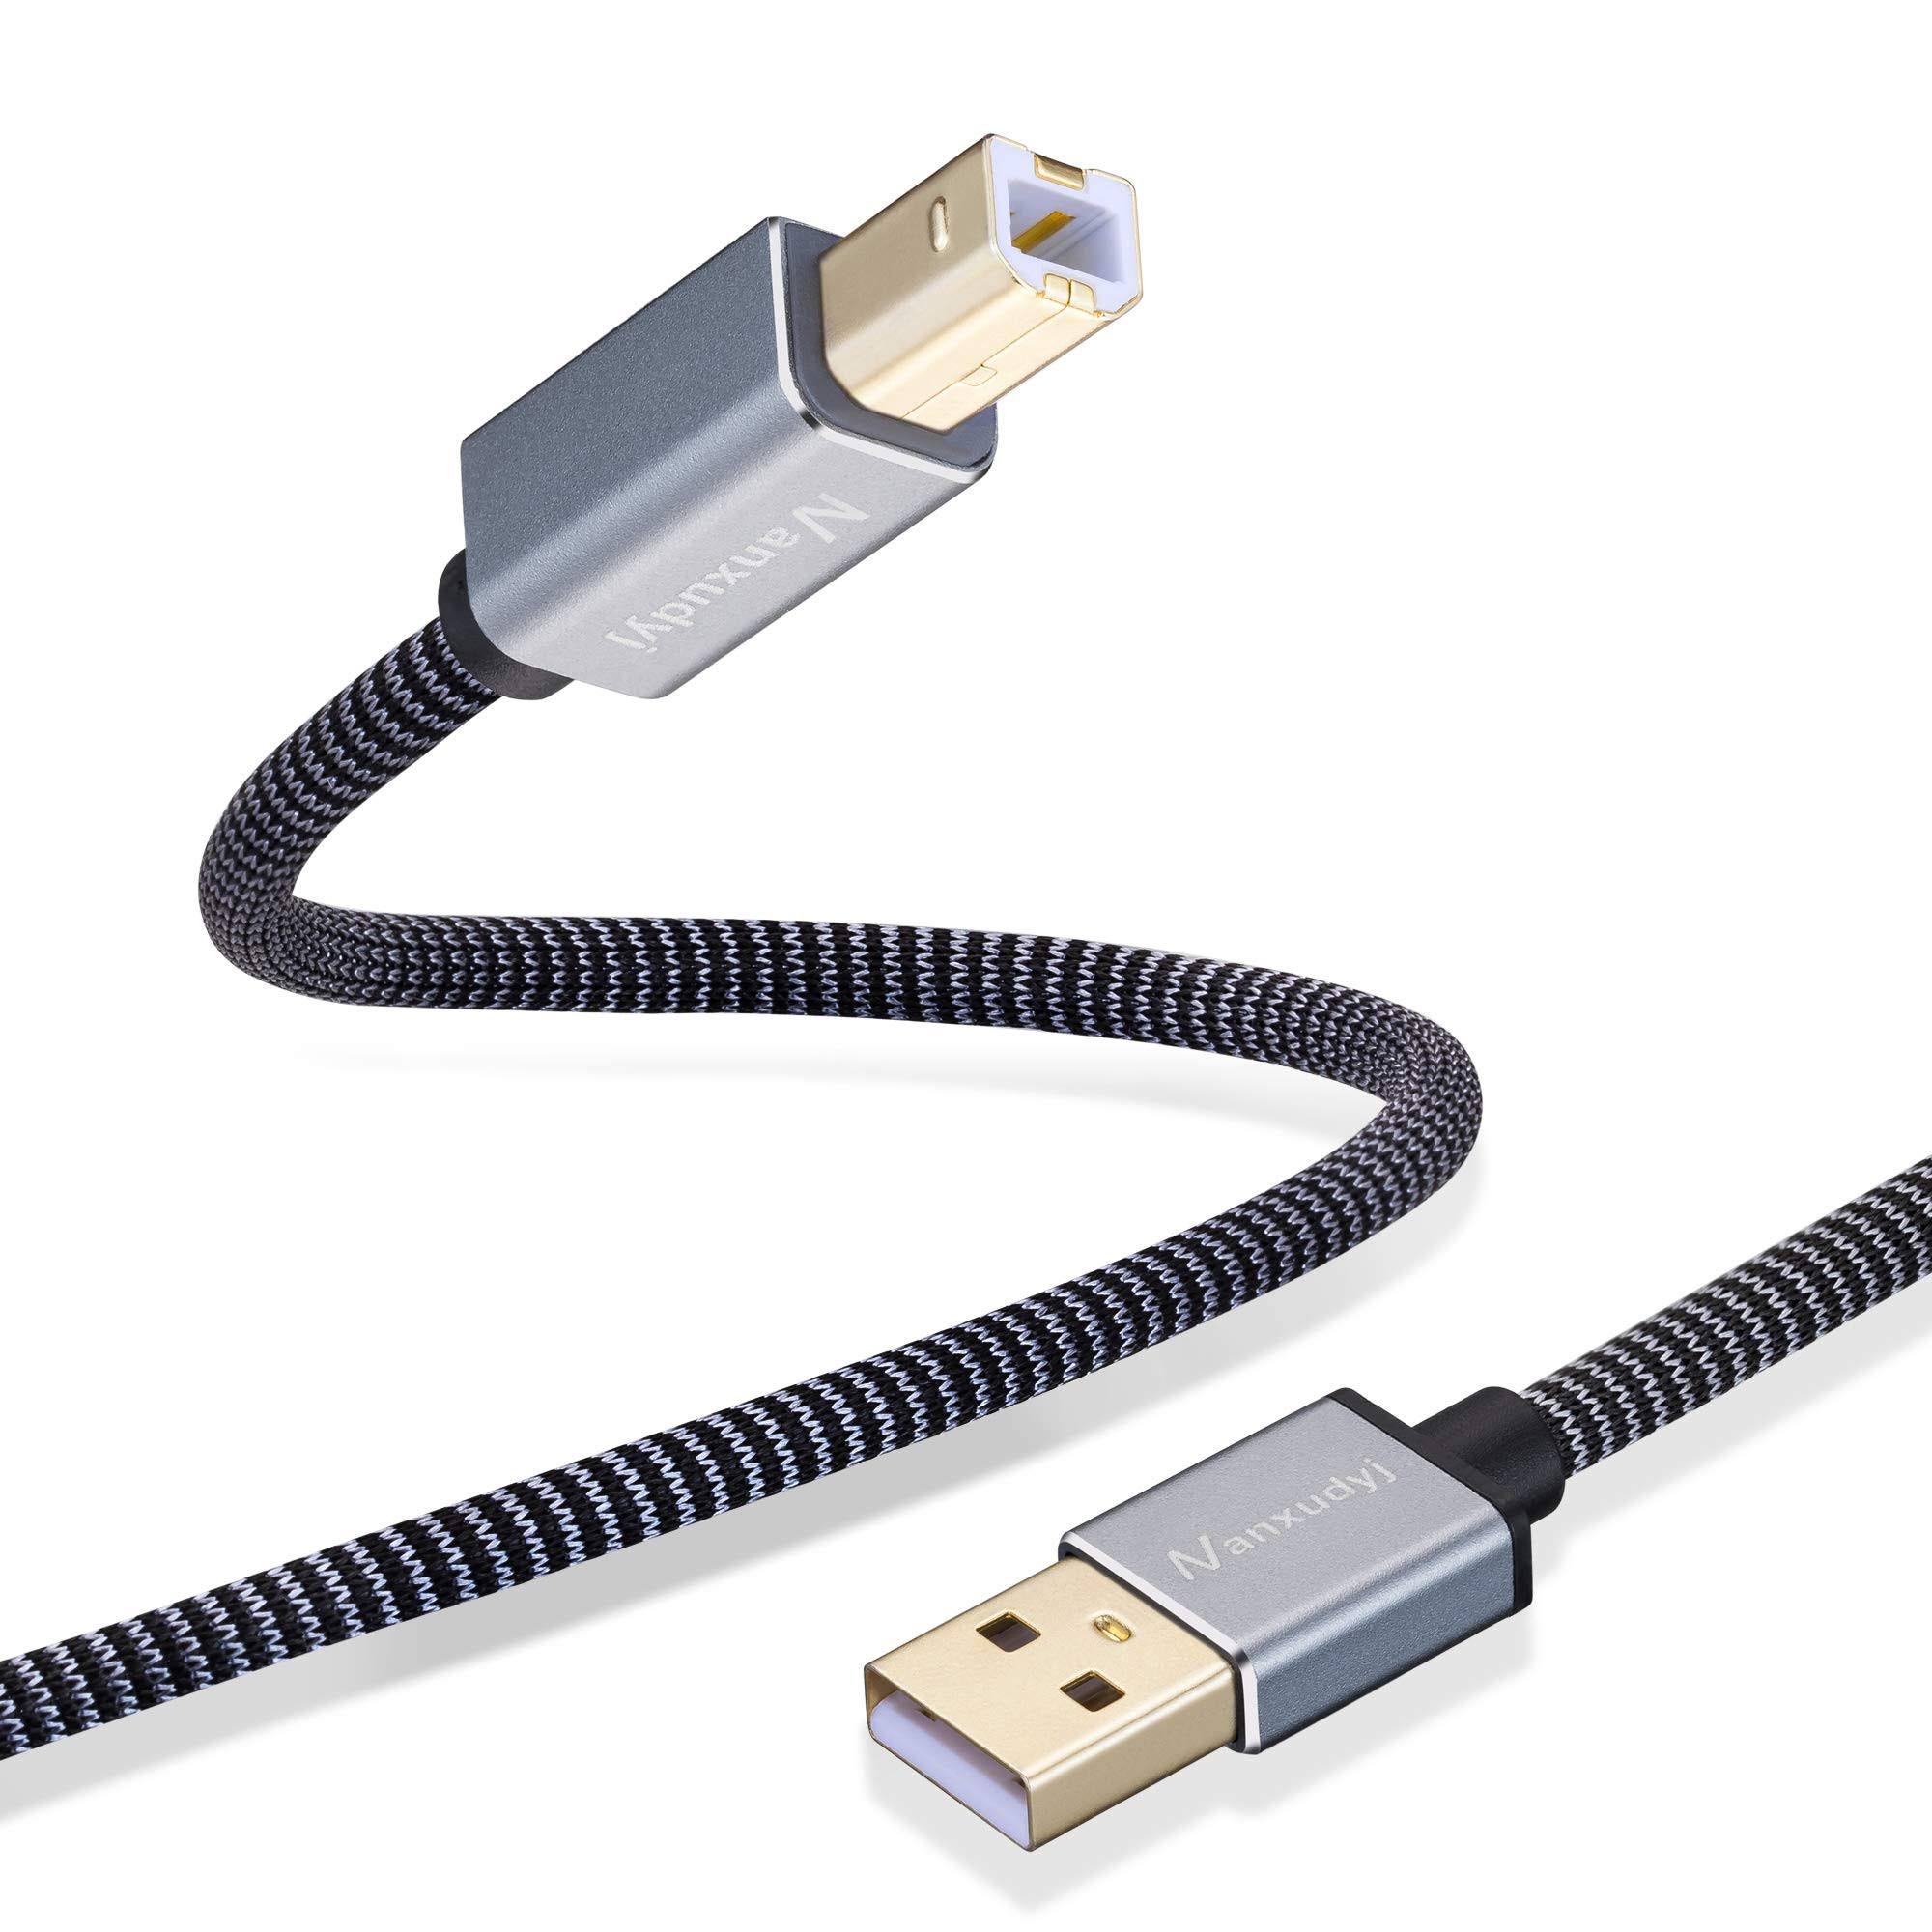 Nanxudyj Universal Printer Cable for High-Speed Data Transfer | Image